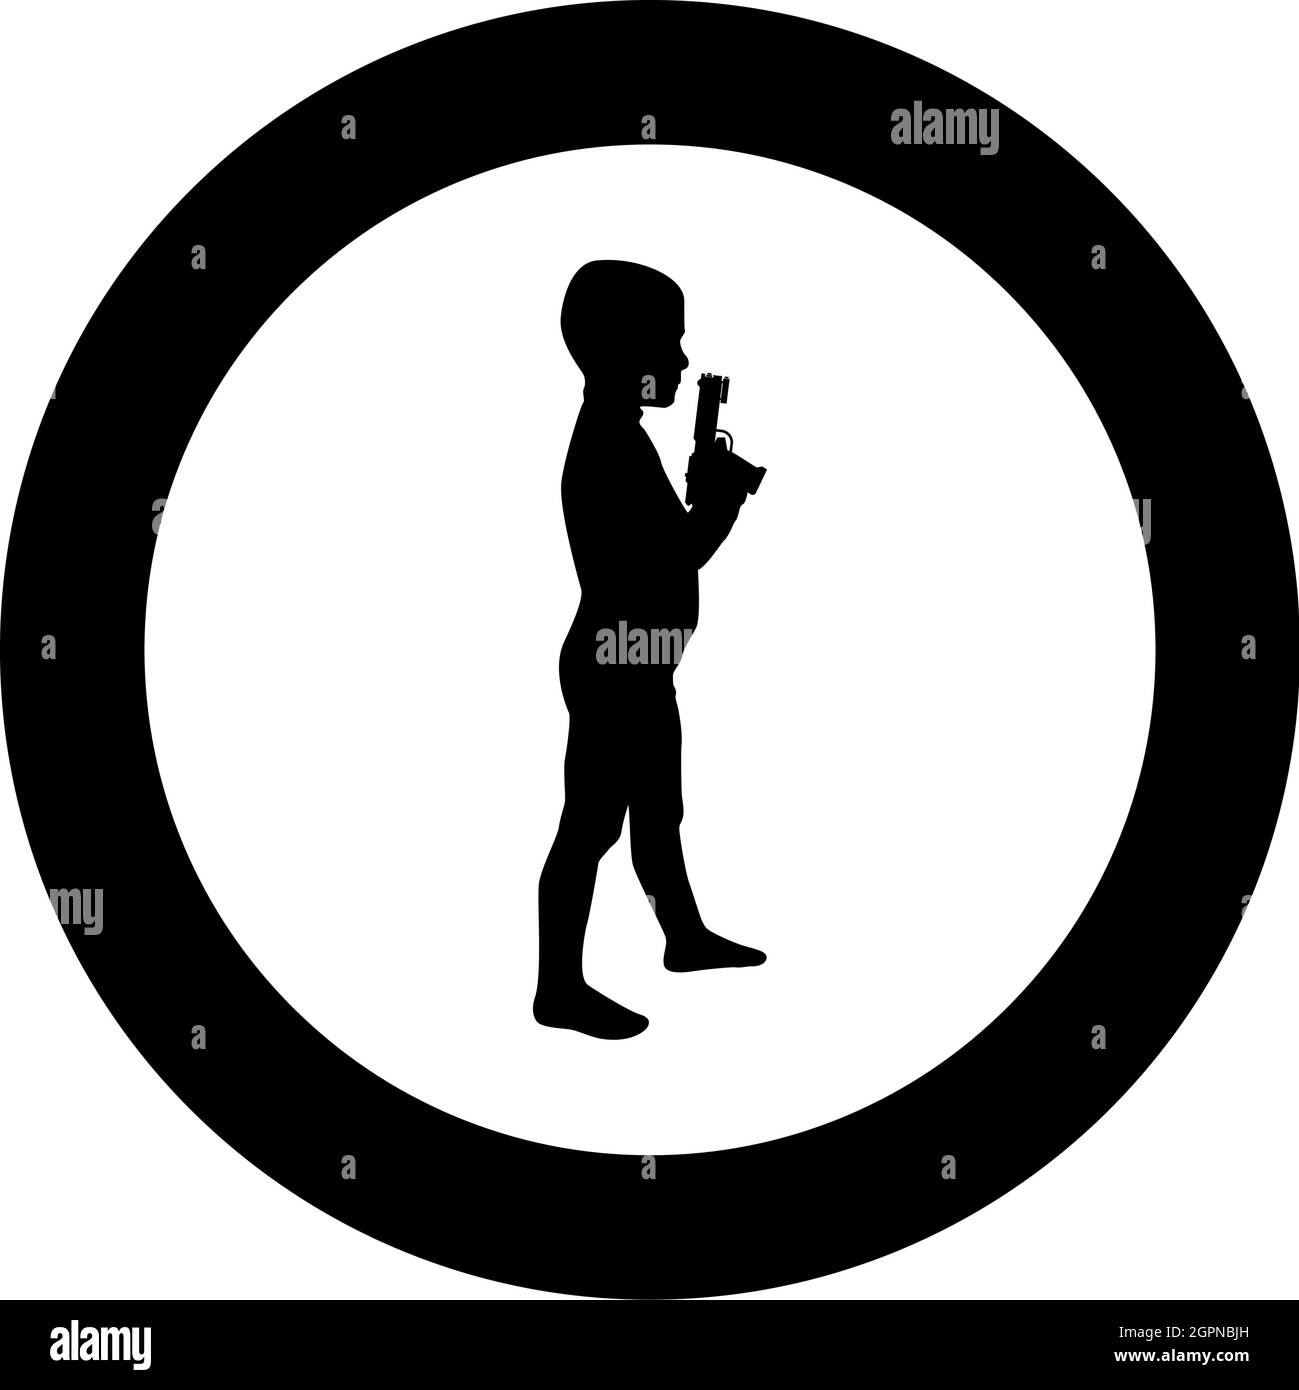 Boy holds toy gun Child playing with pistol game Childhood Shooting weapon concept Preschool Cute little male playing criminal silhouette in circle round black color vector illustration solid outline style image Stock Vector